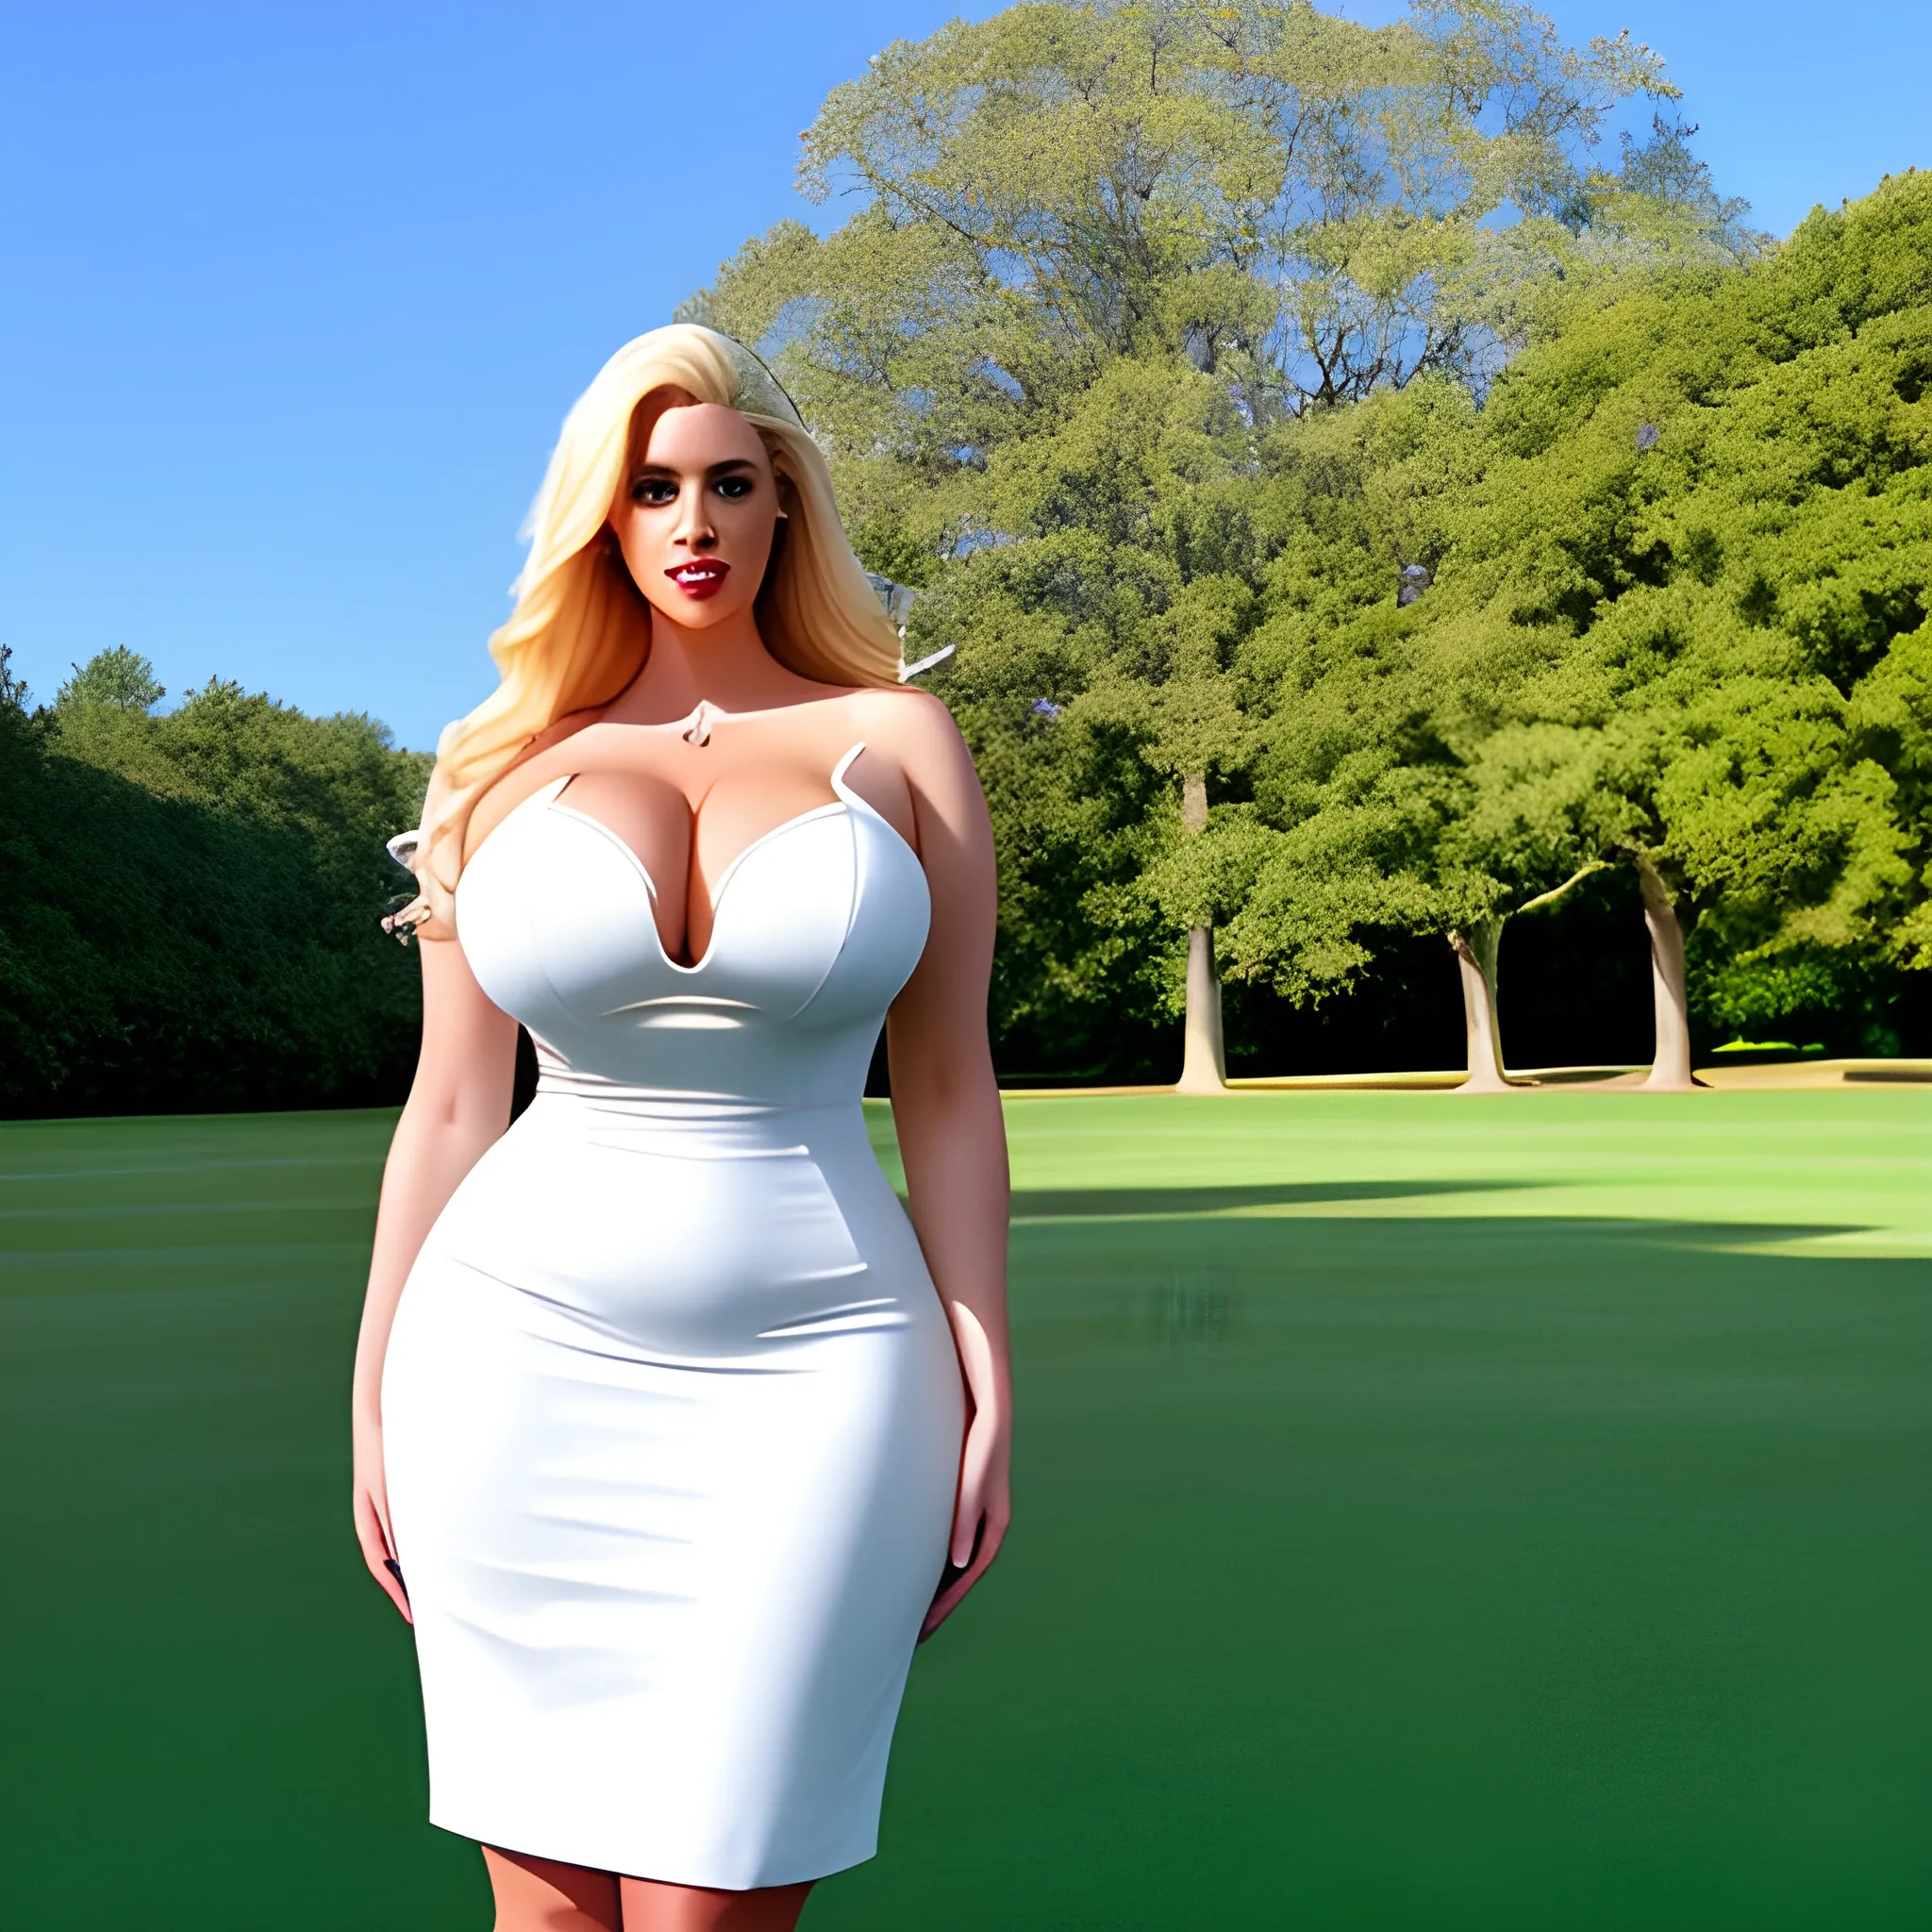 elegant huge very tall voluptuous blonde very young girl with very small head and very broad shoulders in short tight white dress standing close on a green lawn under blue sky towerring strongly over us 